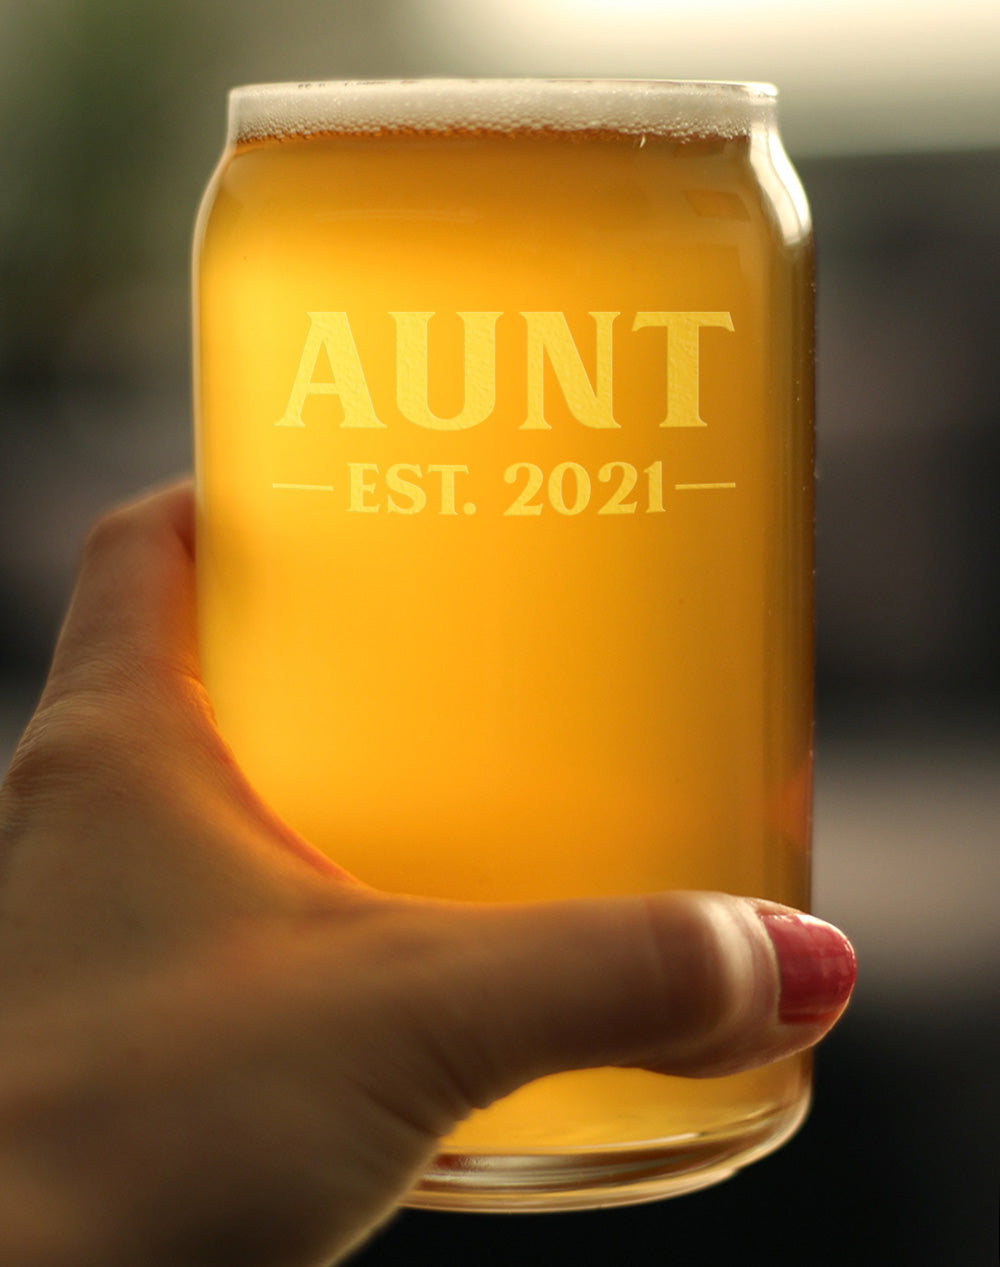 Aunt Est 2021 - New Aunties Beer Can Pint Glass Gift for First Time Aunts - Bold 16 Oz Glasses